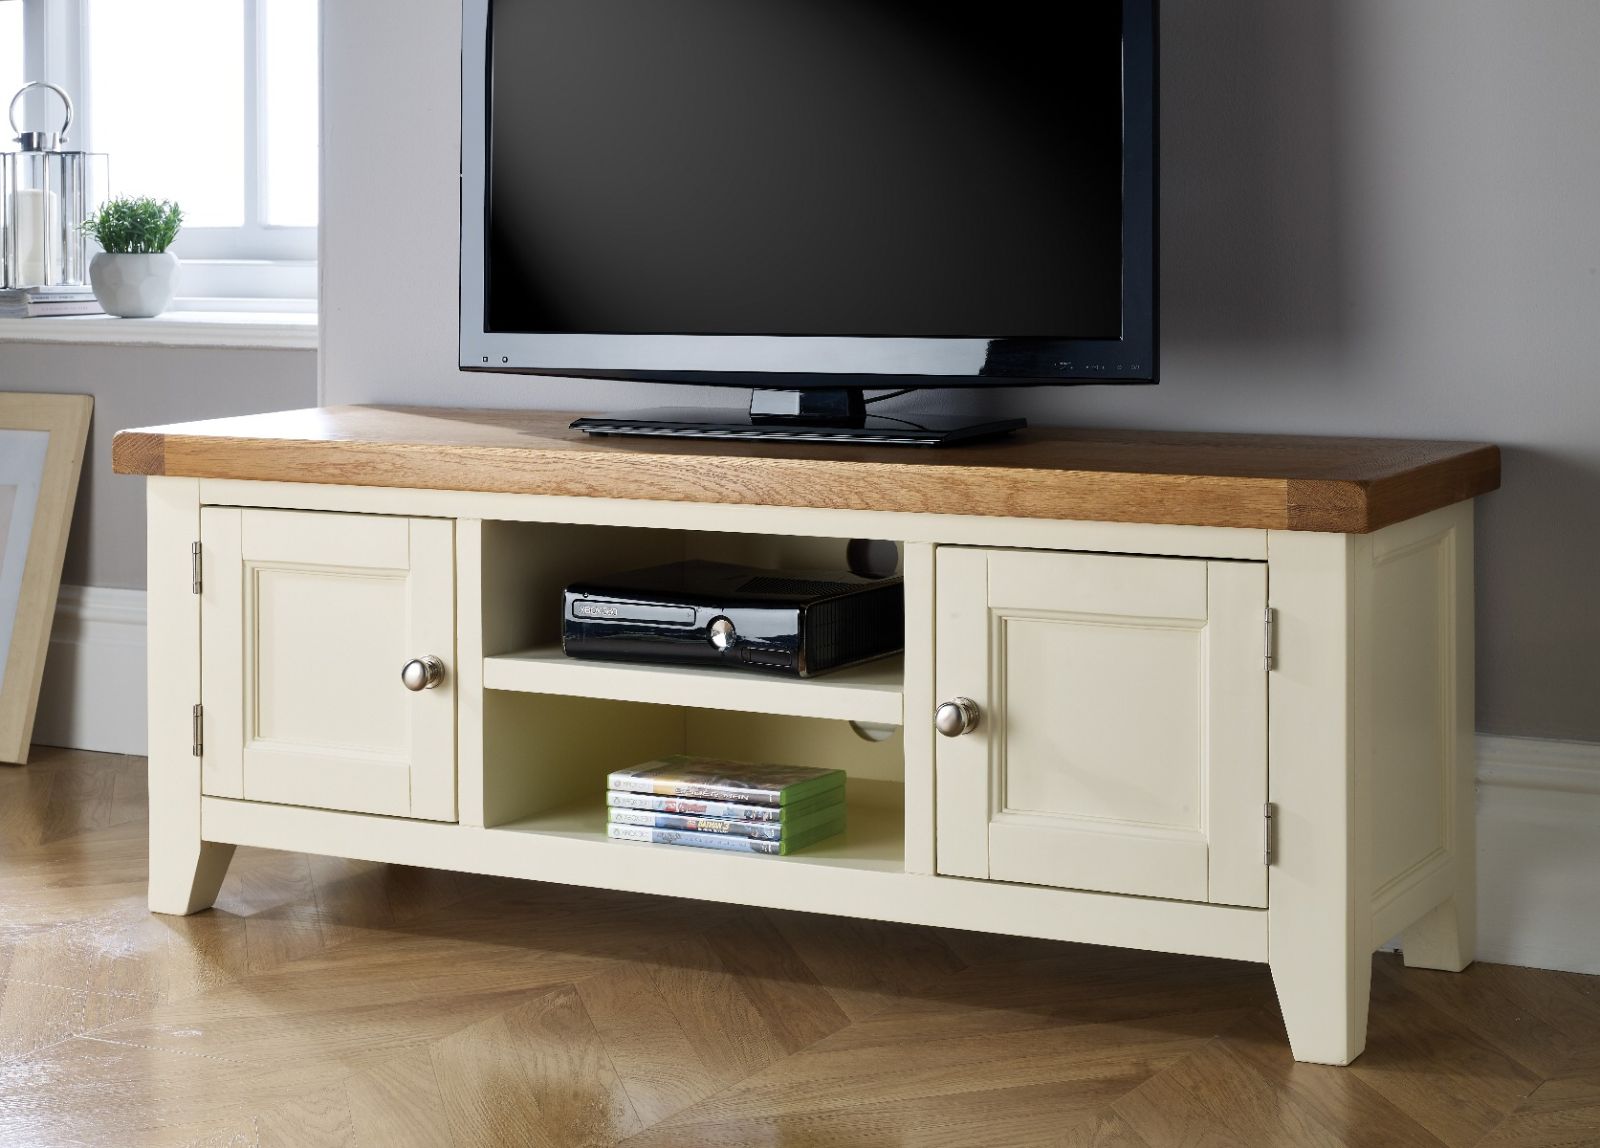 Country Cottage Cream Painted Large Double Door Oak TV Unit - 10% OFF CODE SAVE